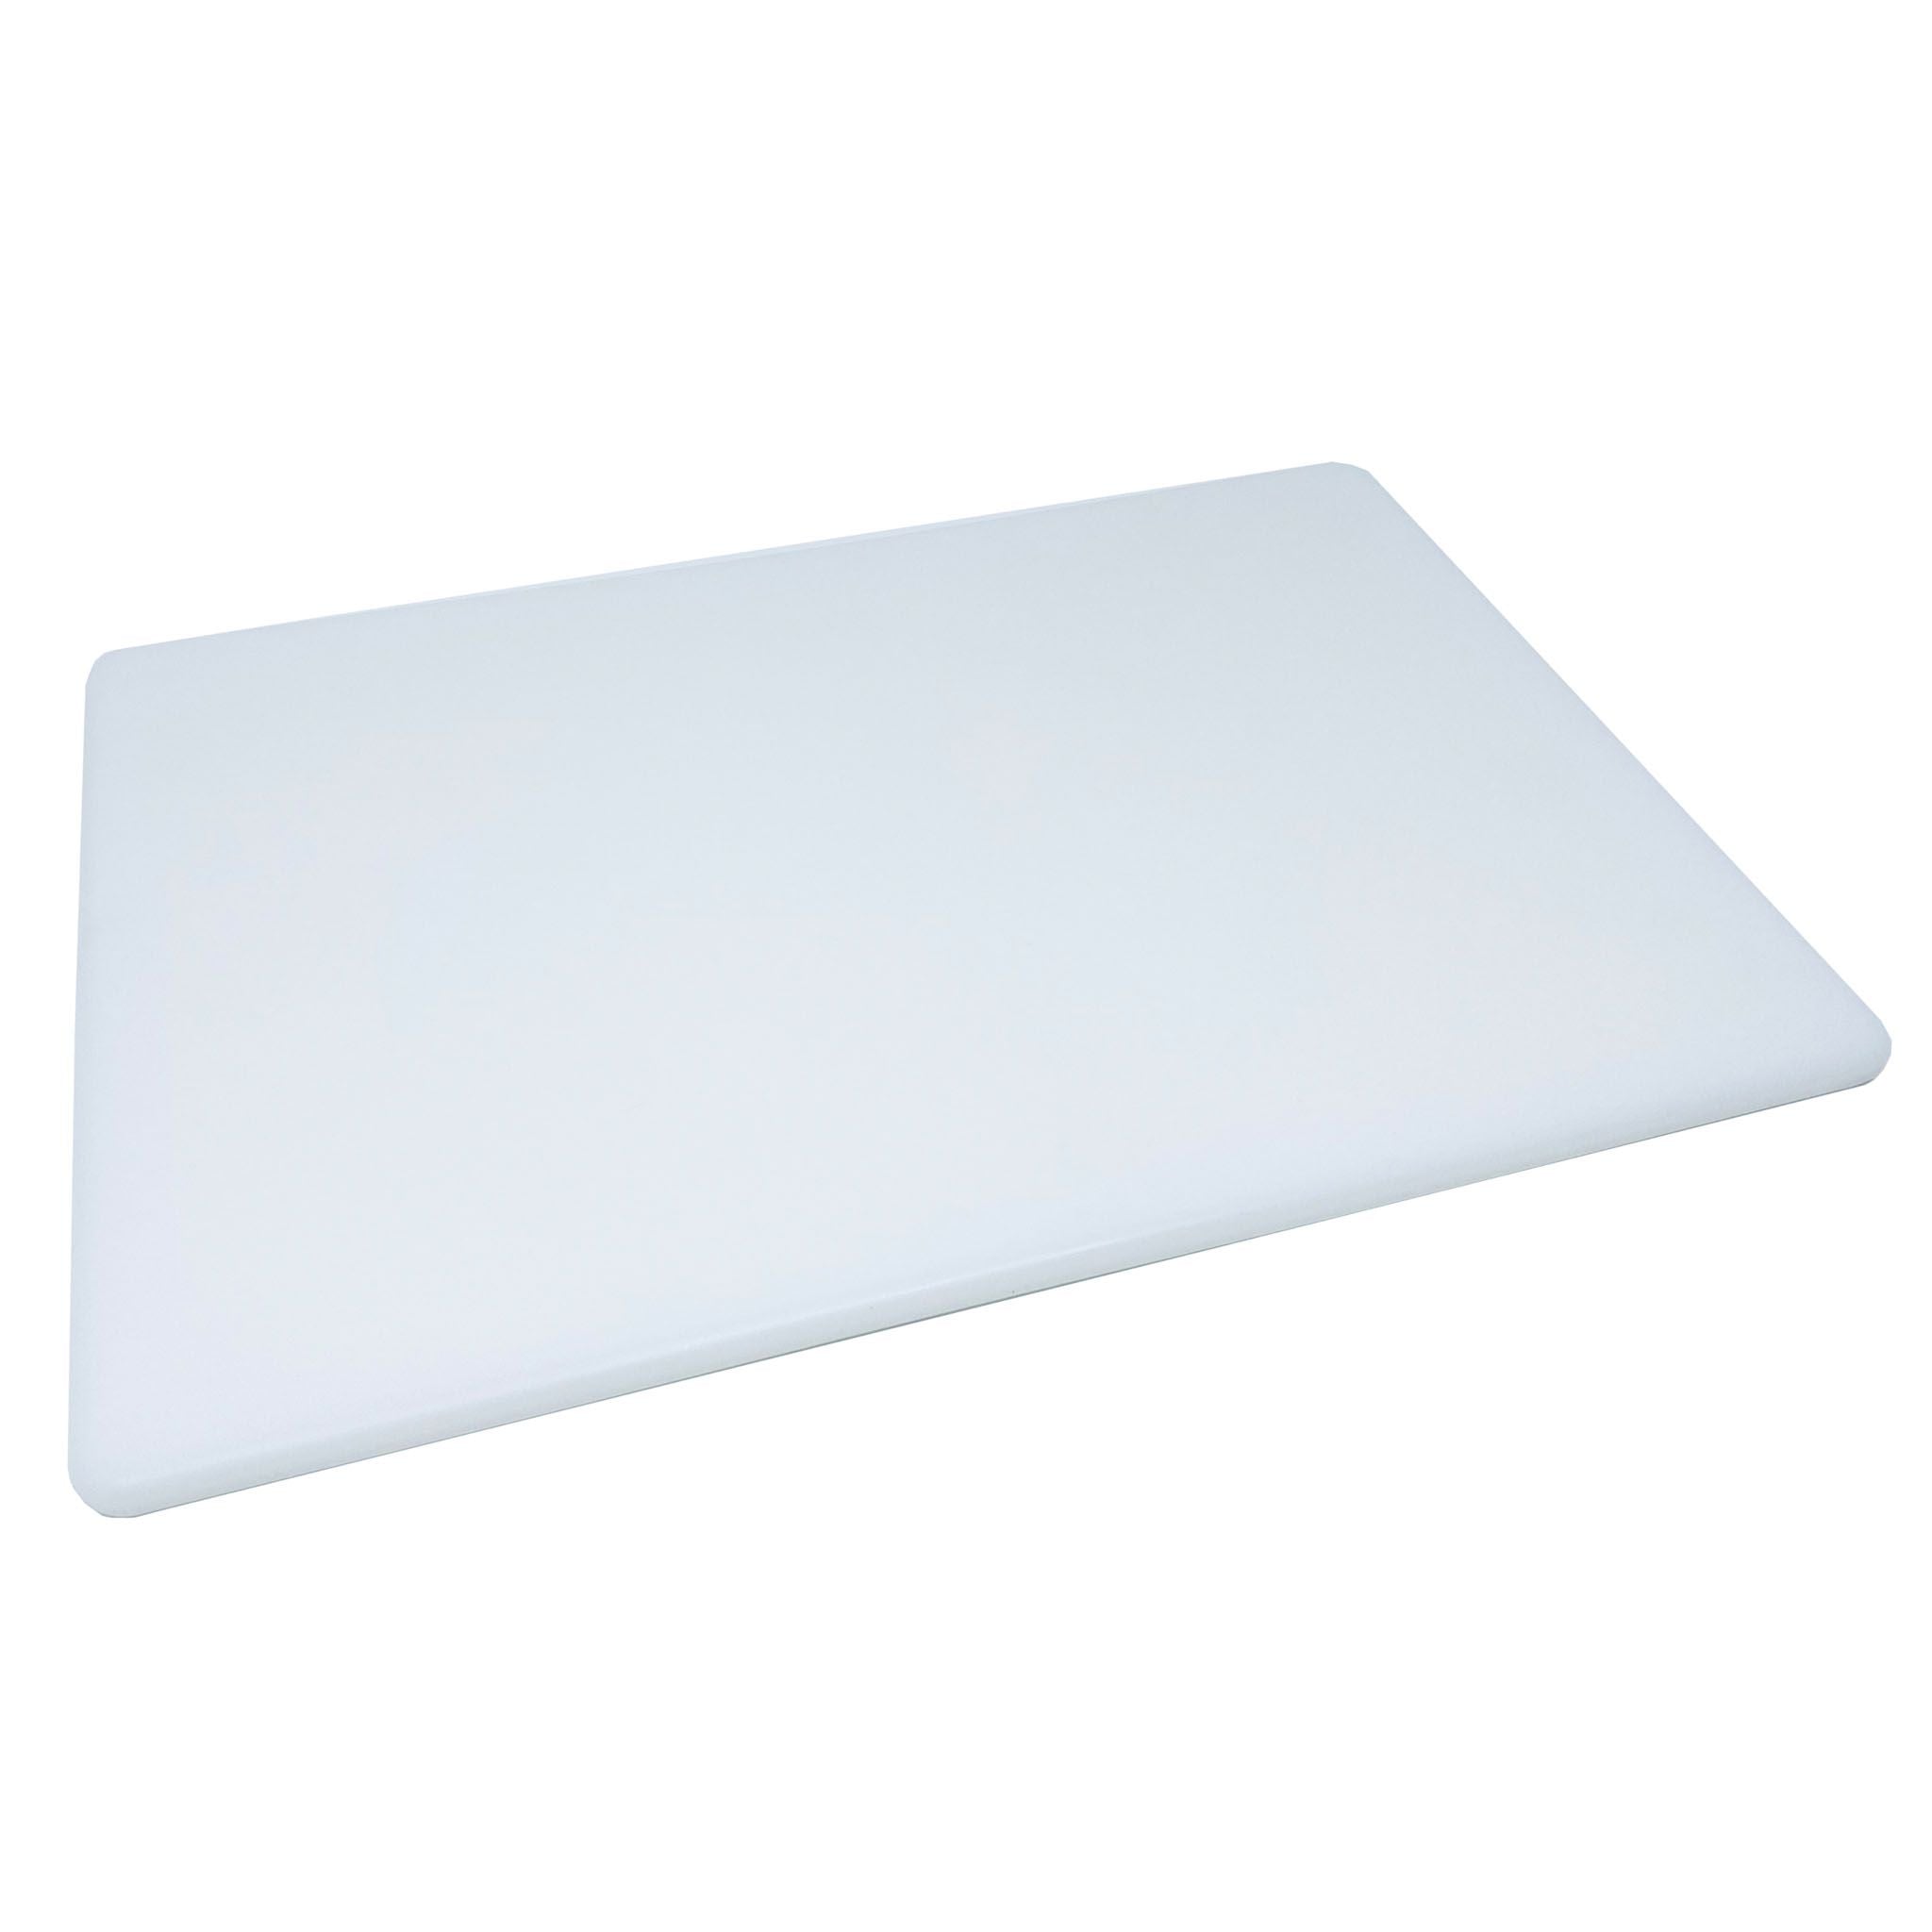 Plastic Cutting Board Sheet, Food Grade HDPE, Natural (White), 3/8  (0.375) Thick, 12 W x 12 L